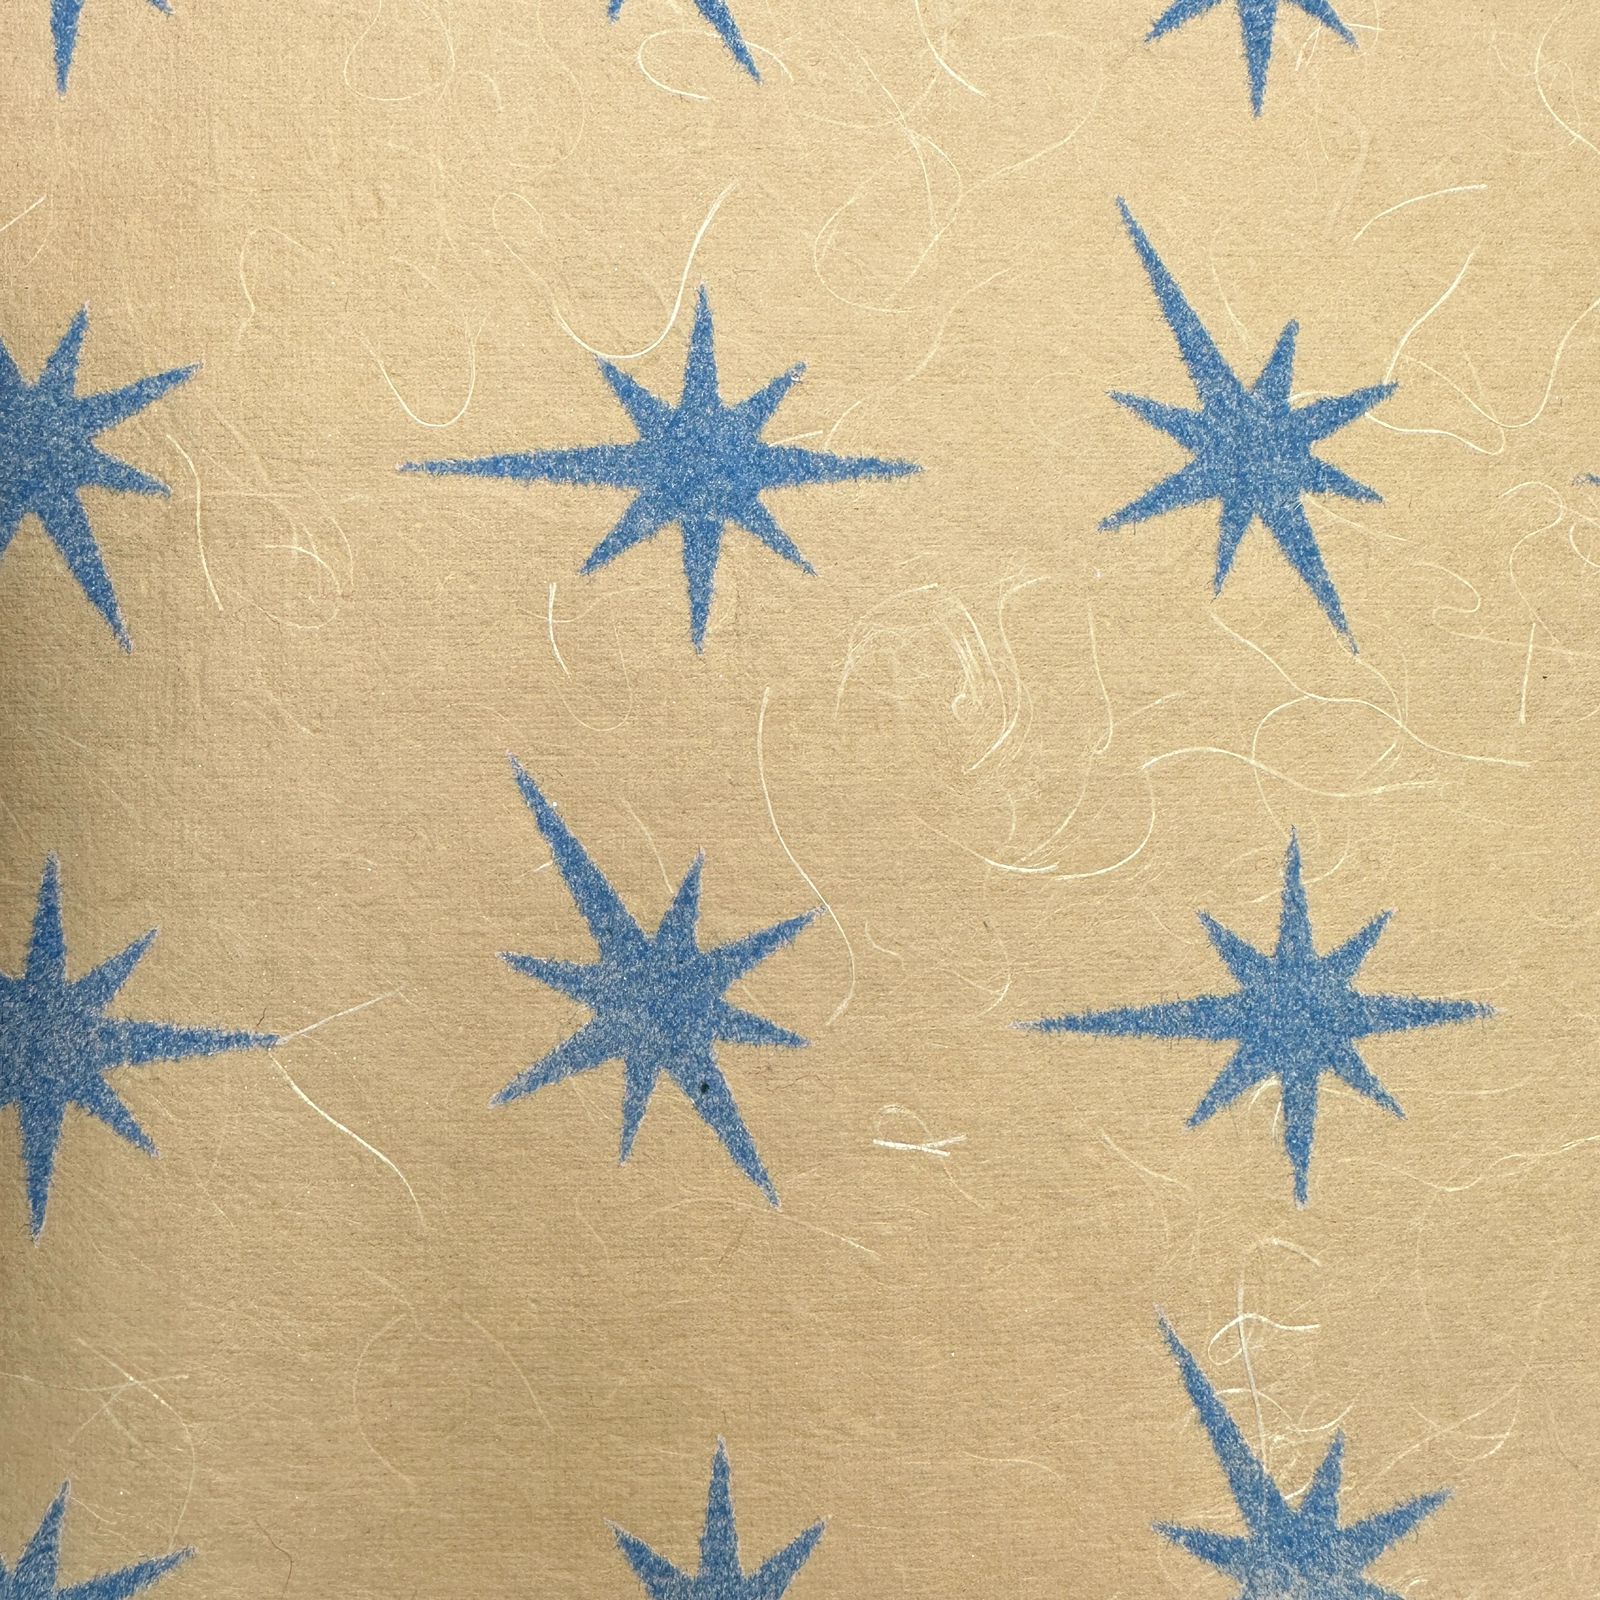 Silk Handmade paper Sheets with Star print 